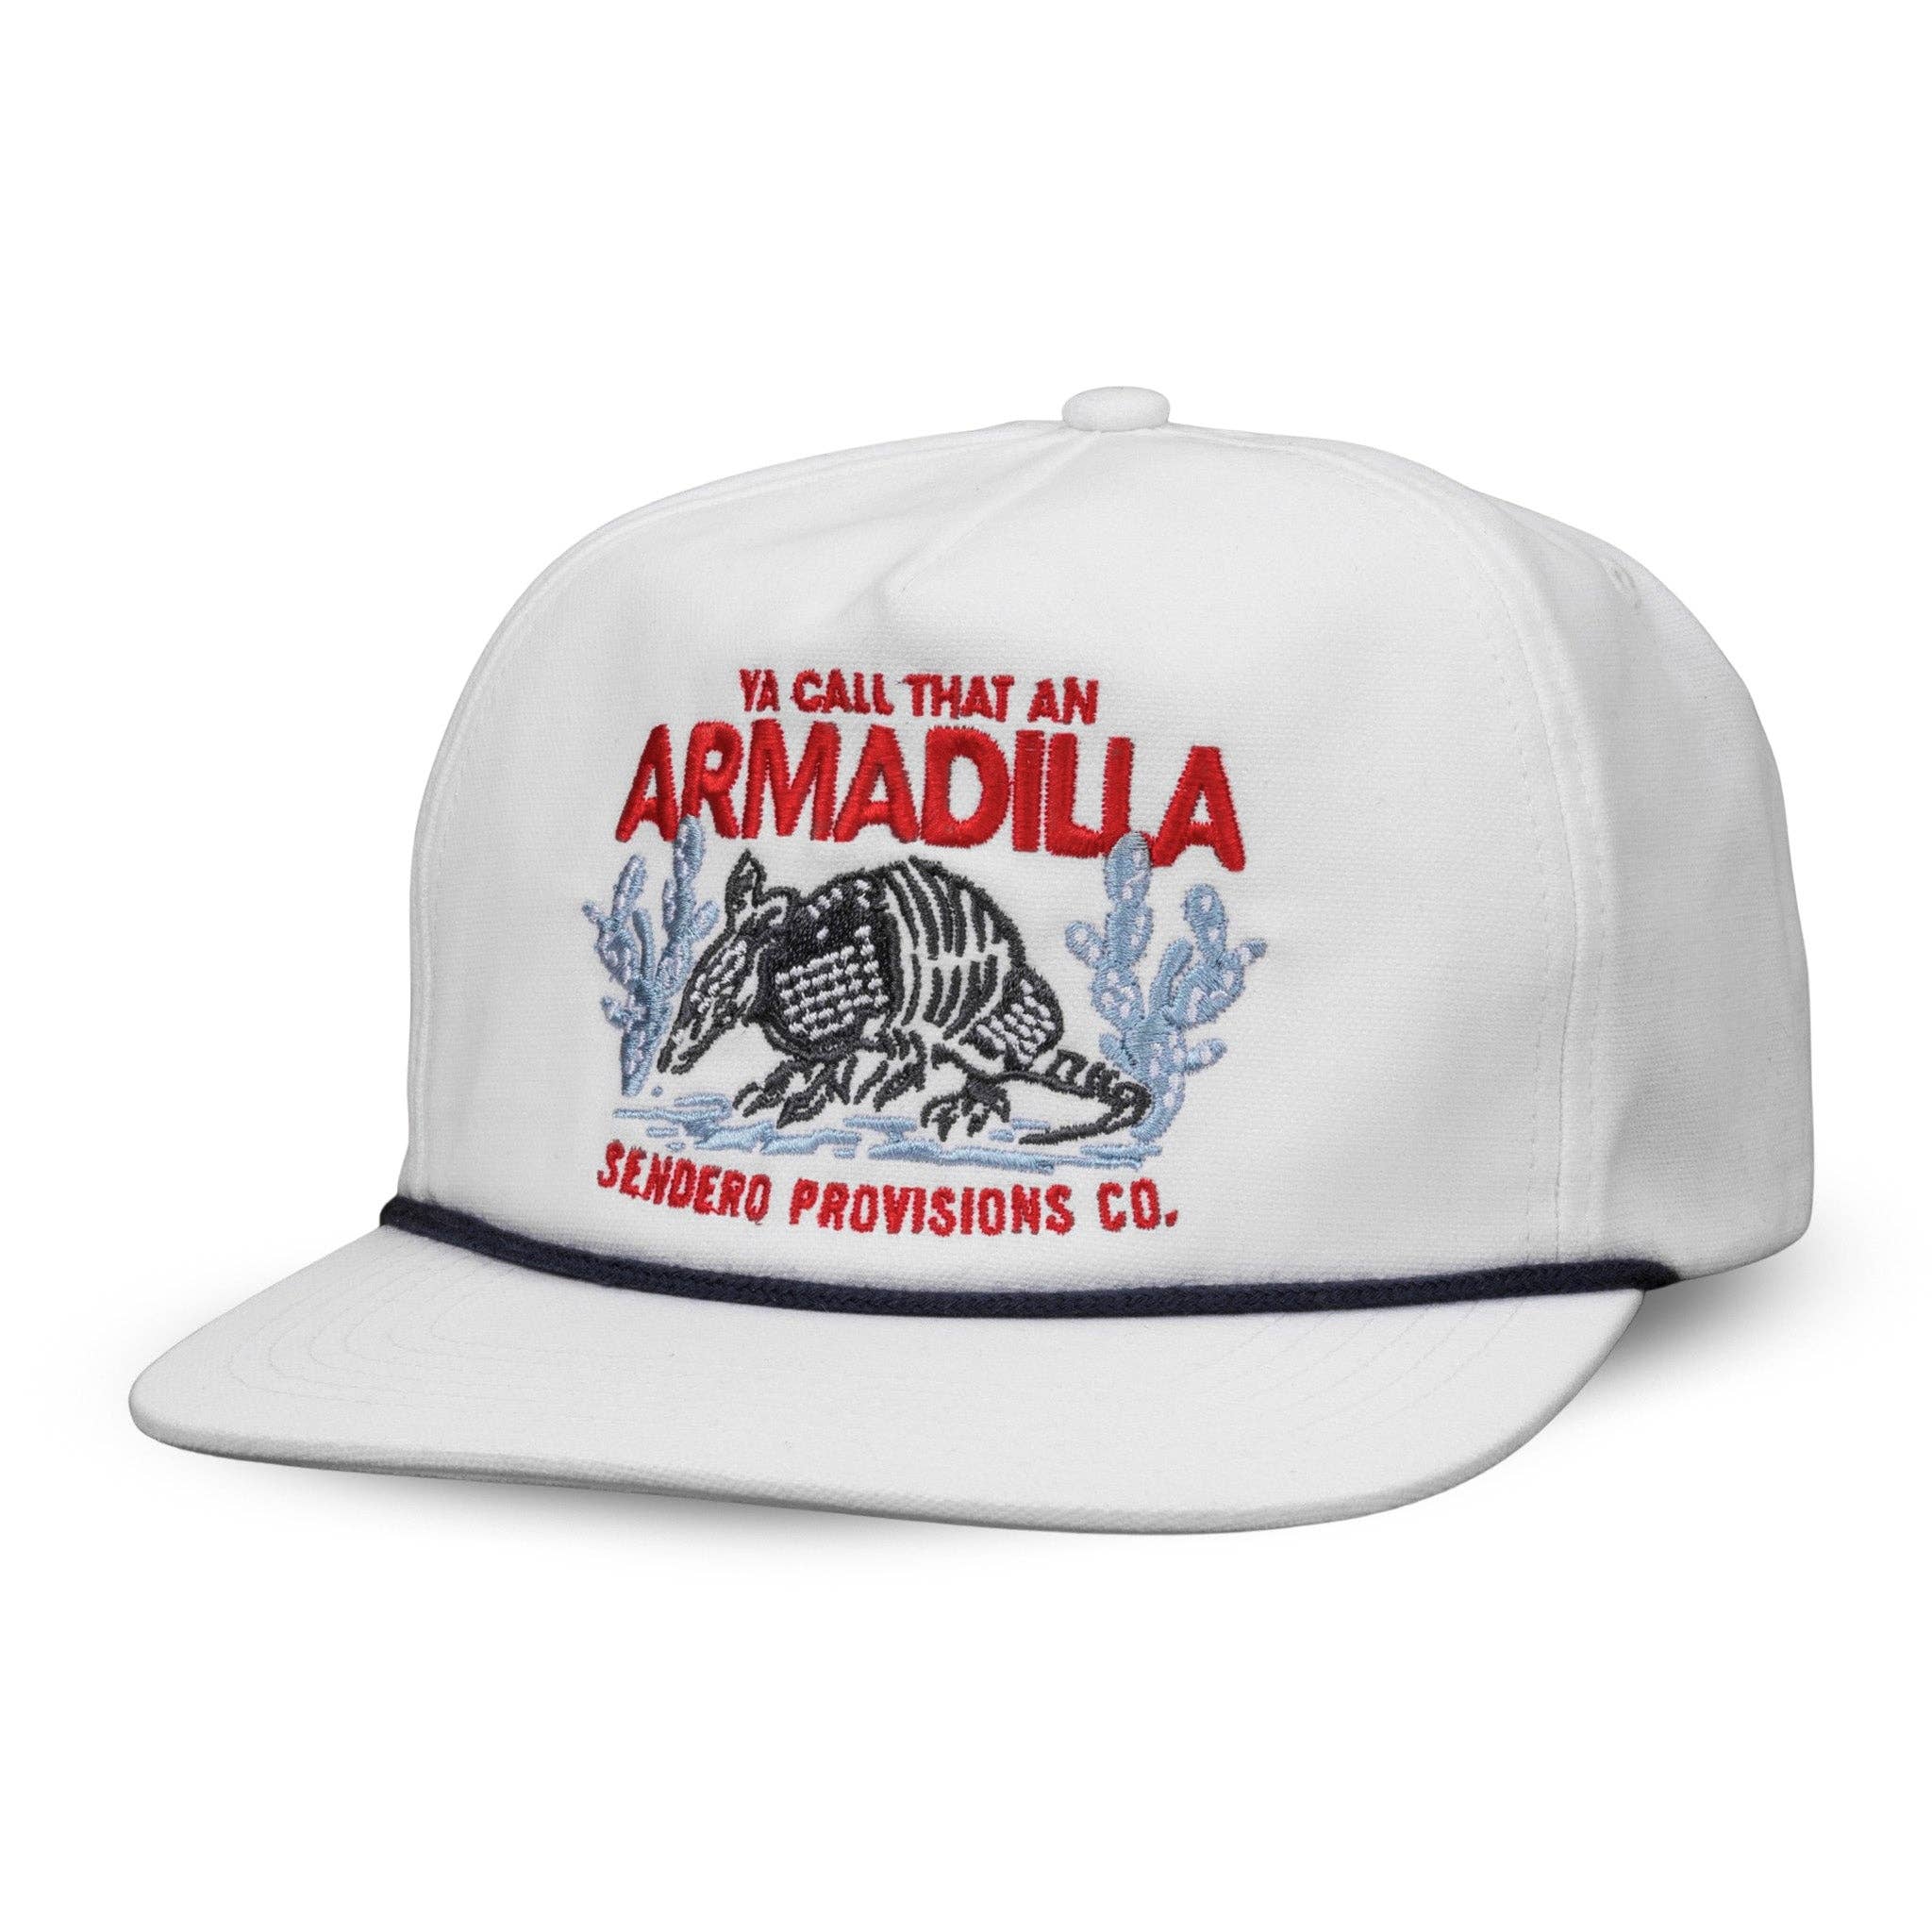 Wholesale Armadilla Hat for your store - Faire